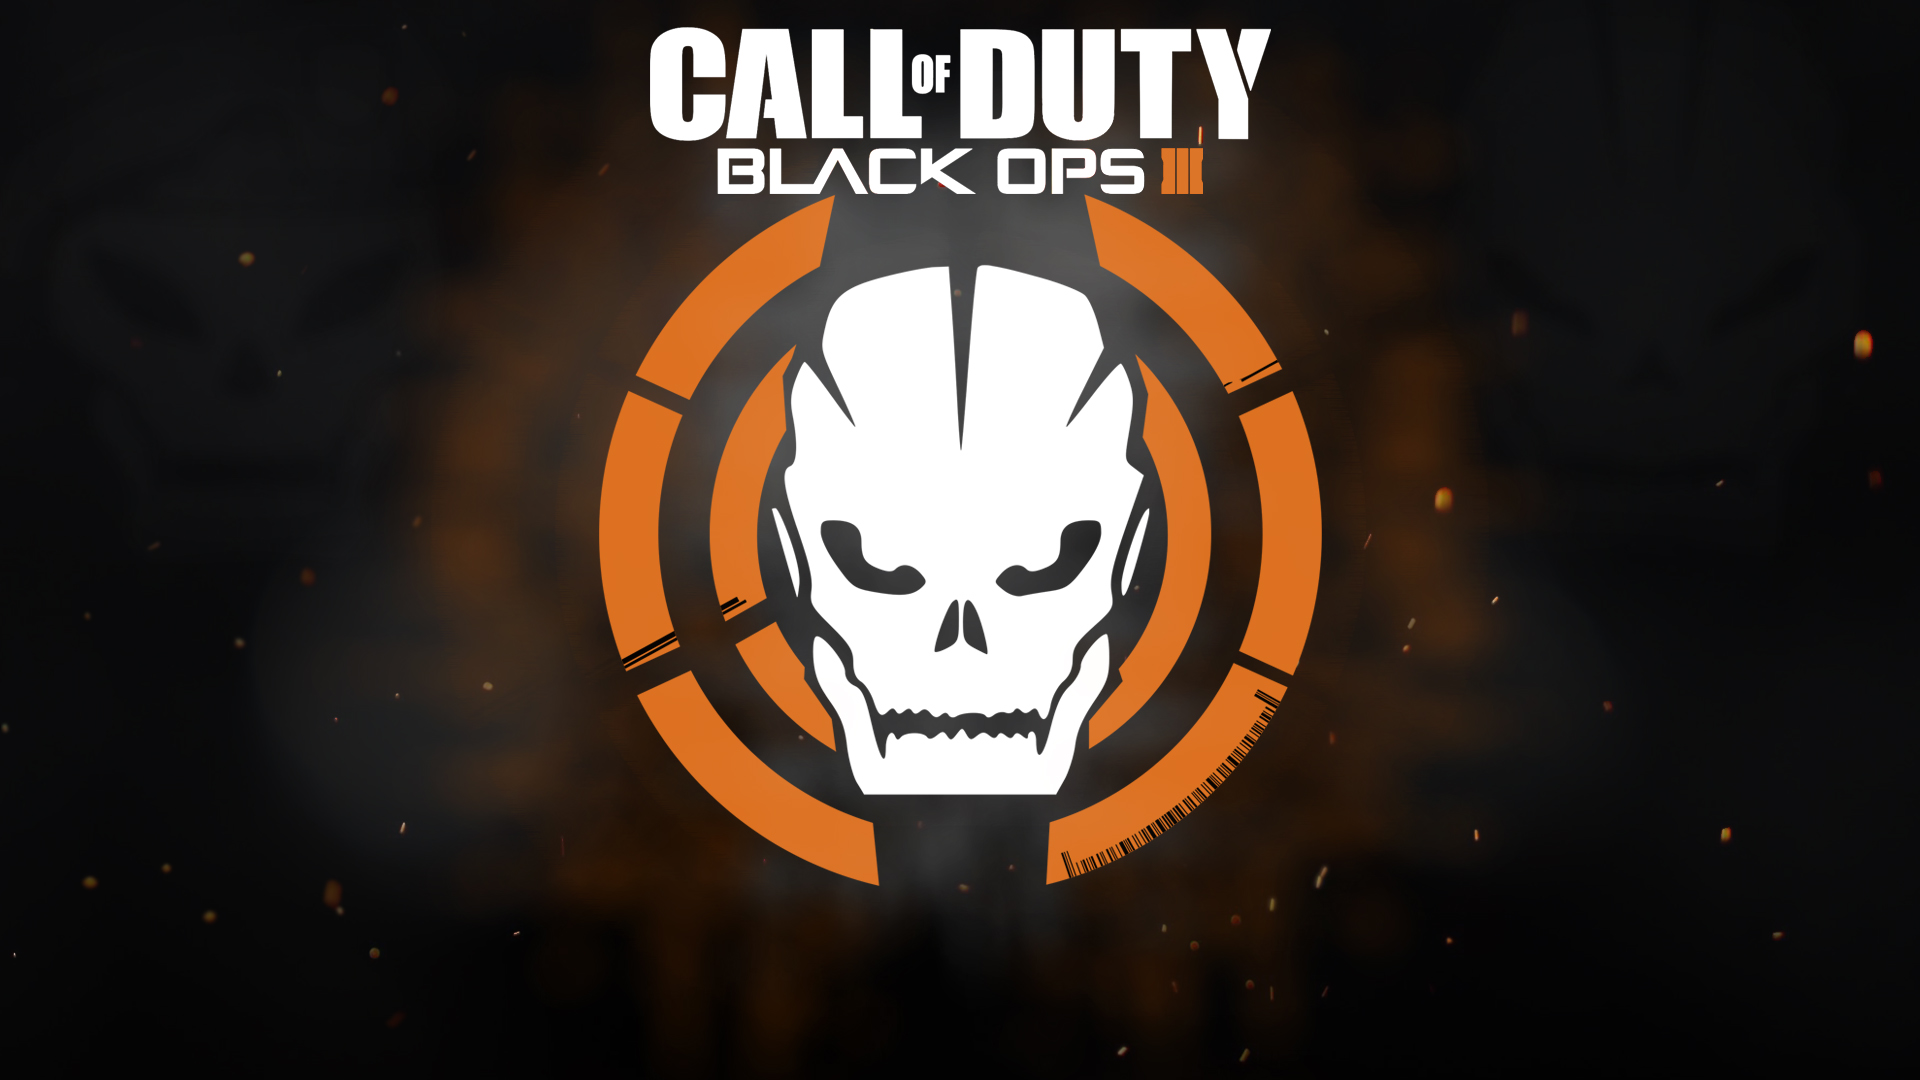 Call of Duty Black Ops 3 Wallpaper 02 by Toby Affenbude 1920x1080